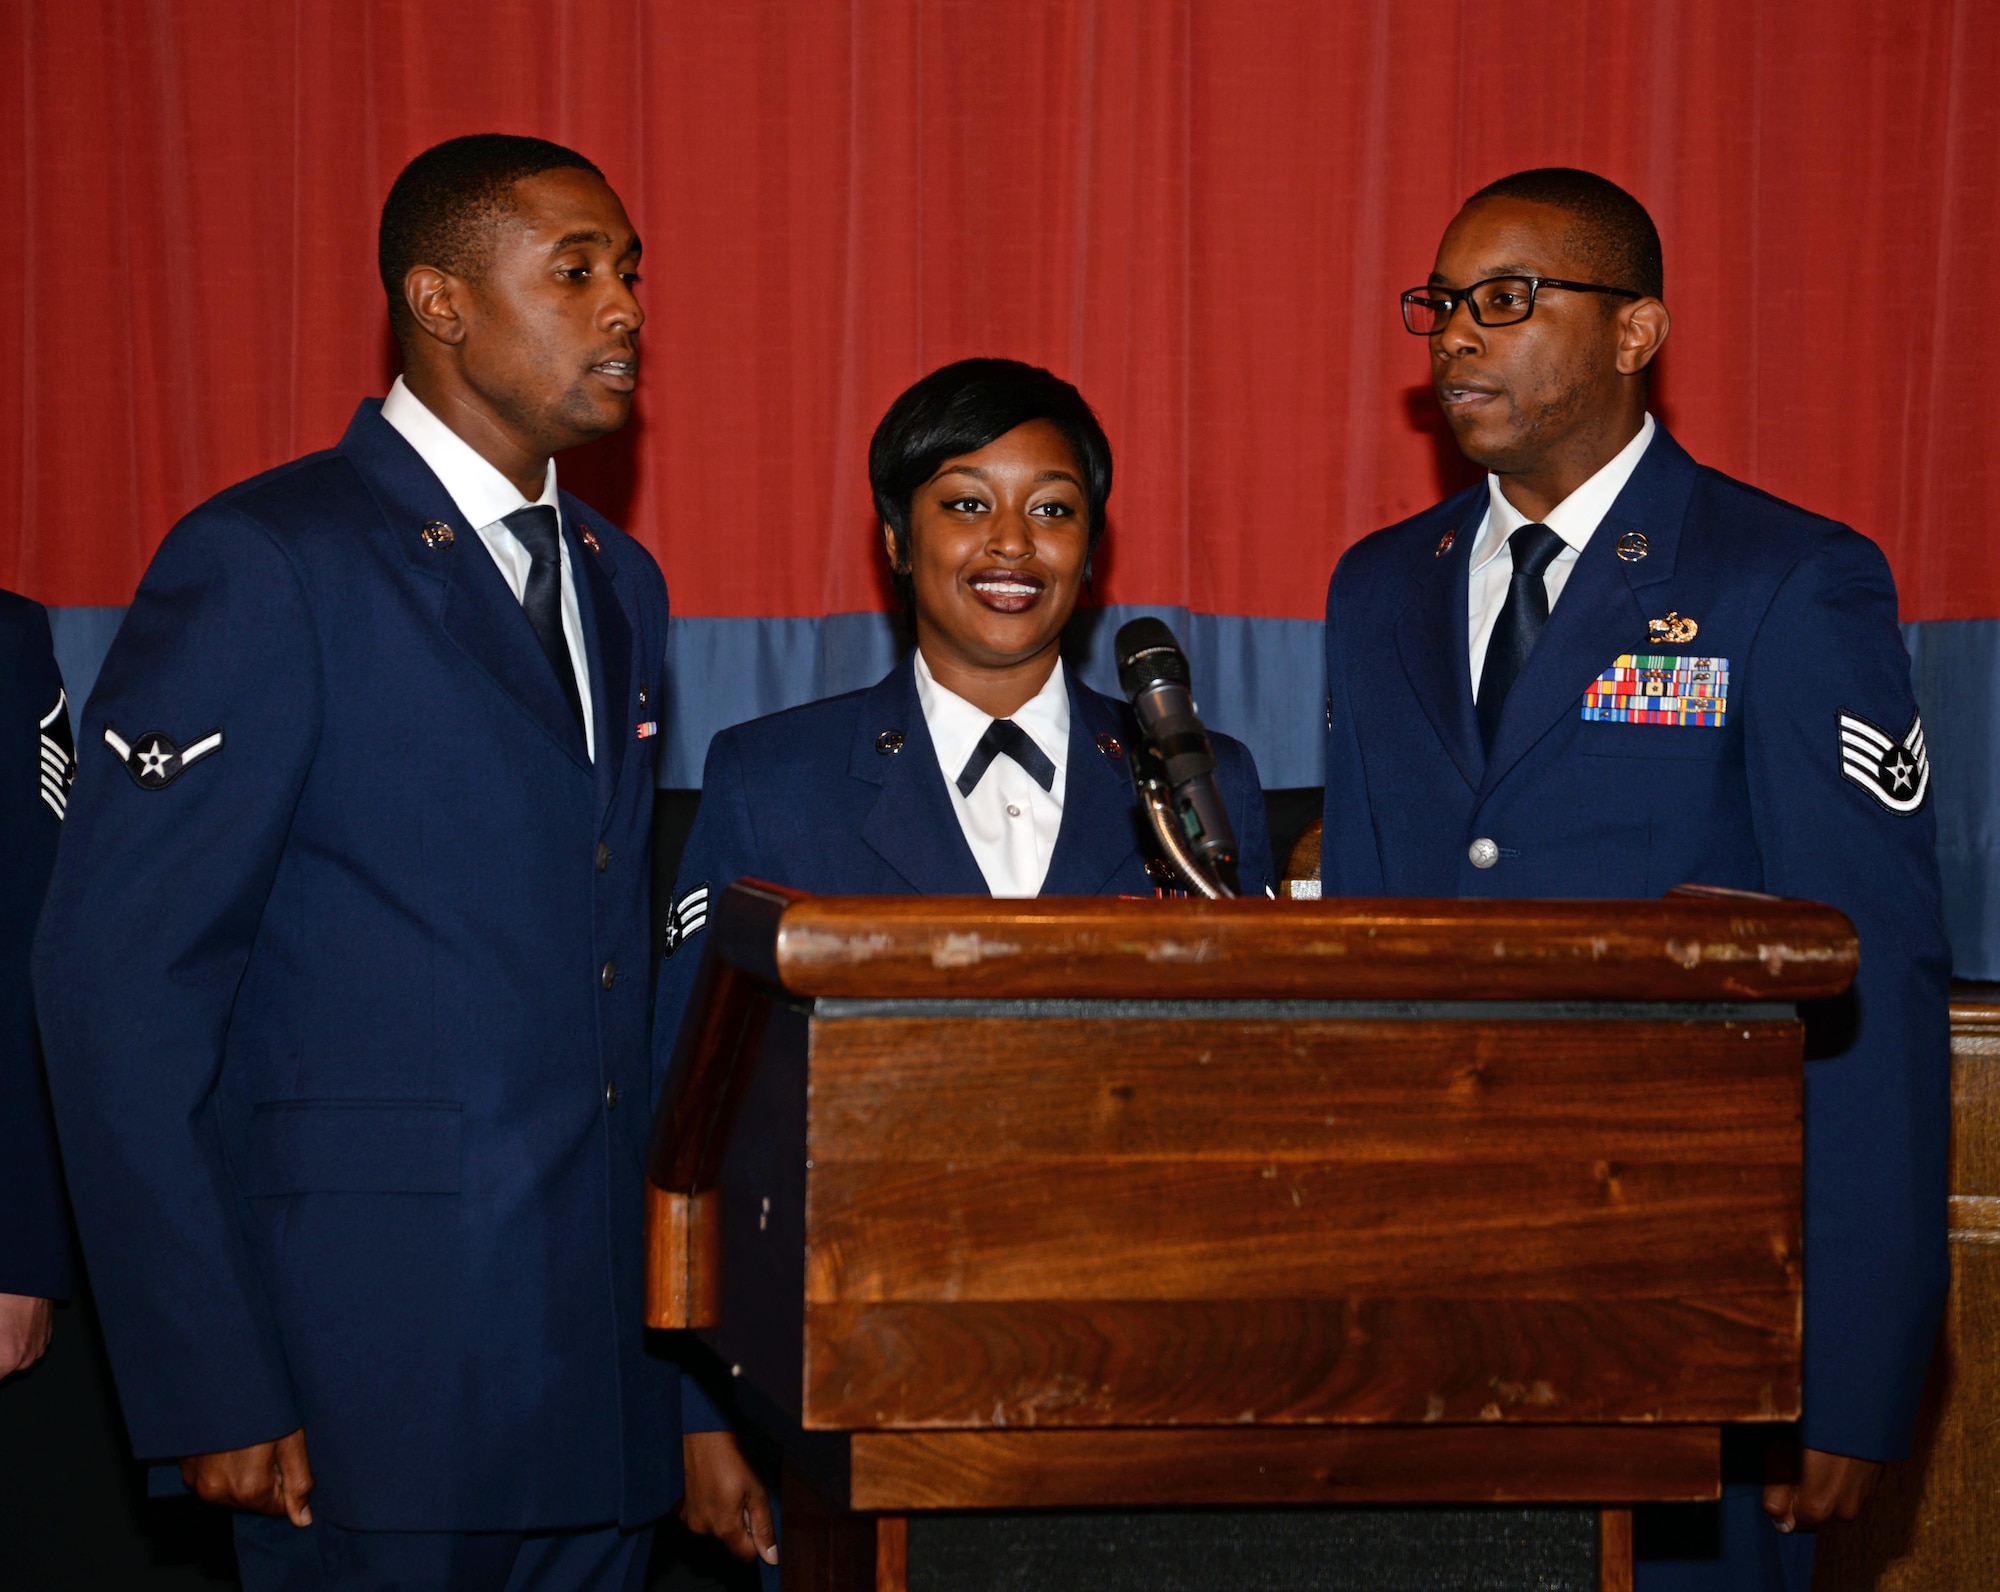 From left to right, U.S. Air Force Airman William Barnes, 352nd Special Operations Aircraft Maintenance Squadron MC-130J Commando II crew chief, Senior Airman Denisha Thomas, 352nd SOAMX communications and navigations systems technician, and Staff Sgt. Ntambwe Kambeya, 100th Logistics Readiness Squadron traffic management supervisor, sing the National Anthem during the opening ceremony of the Air Force Ball Sept. 17, 2016, on RAF Mildenhall, England. The celebration consisted of a presentation of the colors, the playing and singing of the British and American national anthems, social hour, a cake-cutting ceremony, and dancing. (U.S. Air Force photo by Senior Airman Christine Halan)